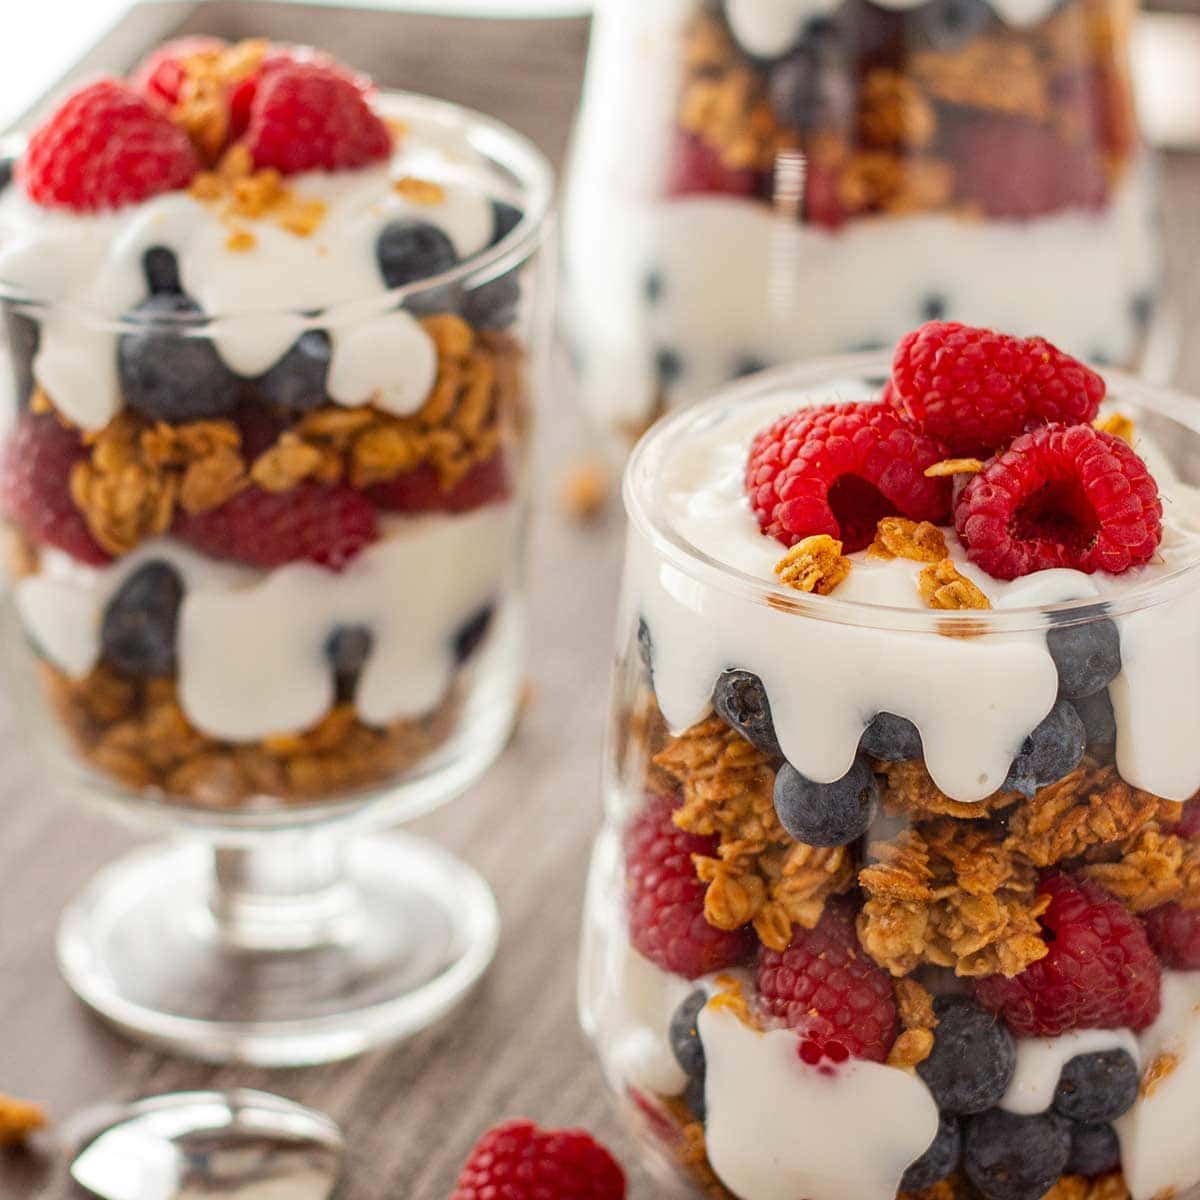 Three glasses, staggered, filled with layers of granola, yogurt, and fresh fruit, garnished with additional fruit and granola, on a gray wooden tray.